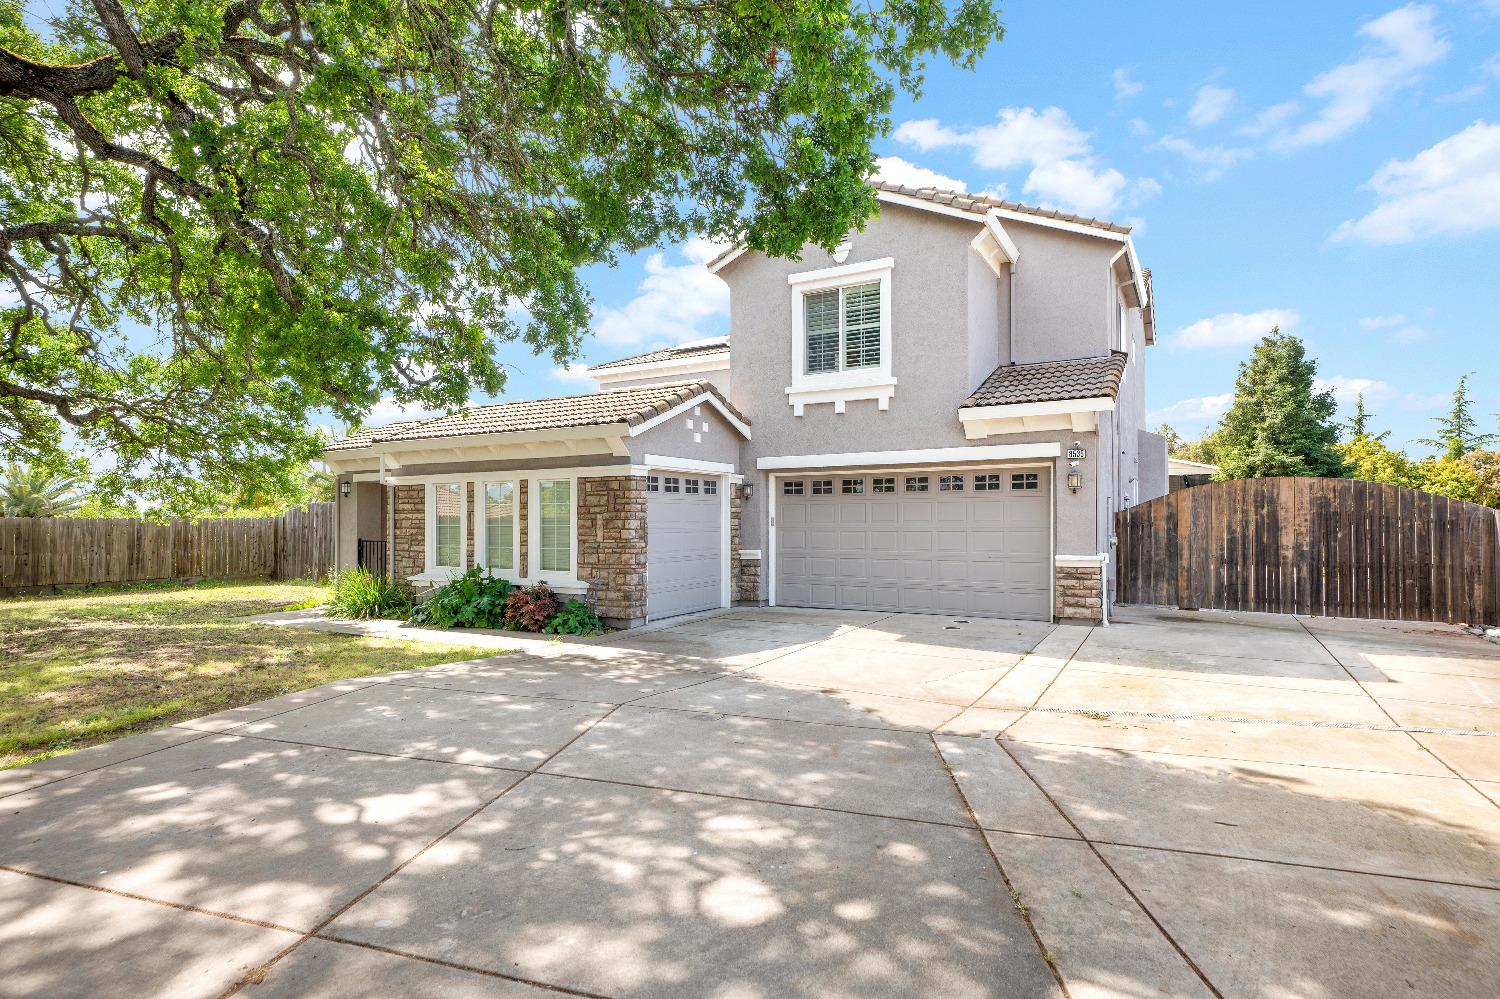 Photo of 8535 Parkwood Wy in Roseville, CA